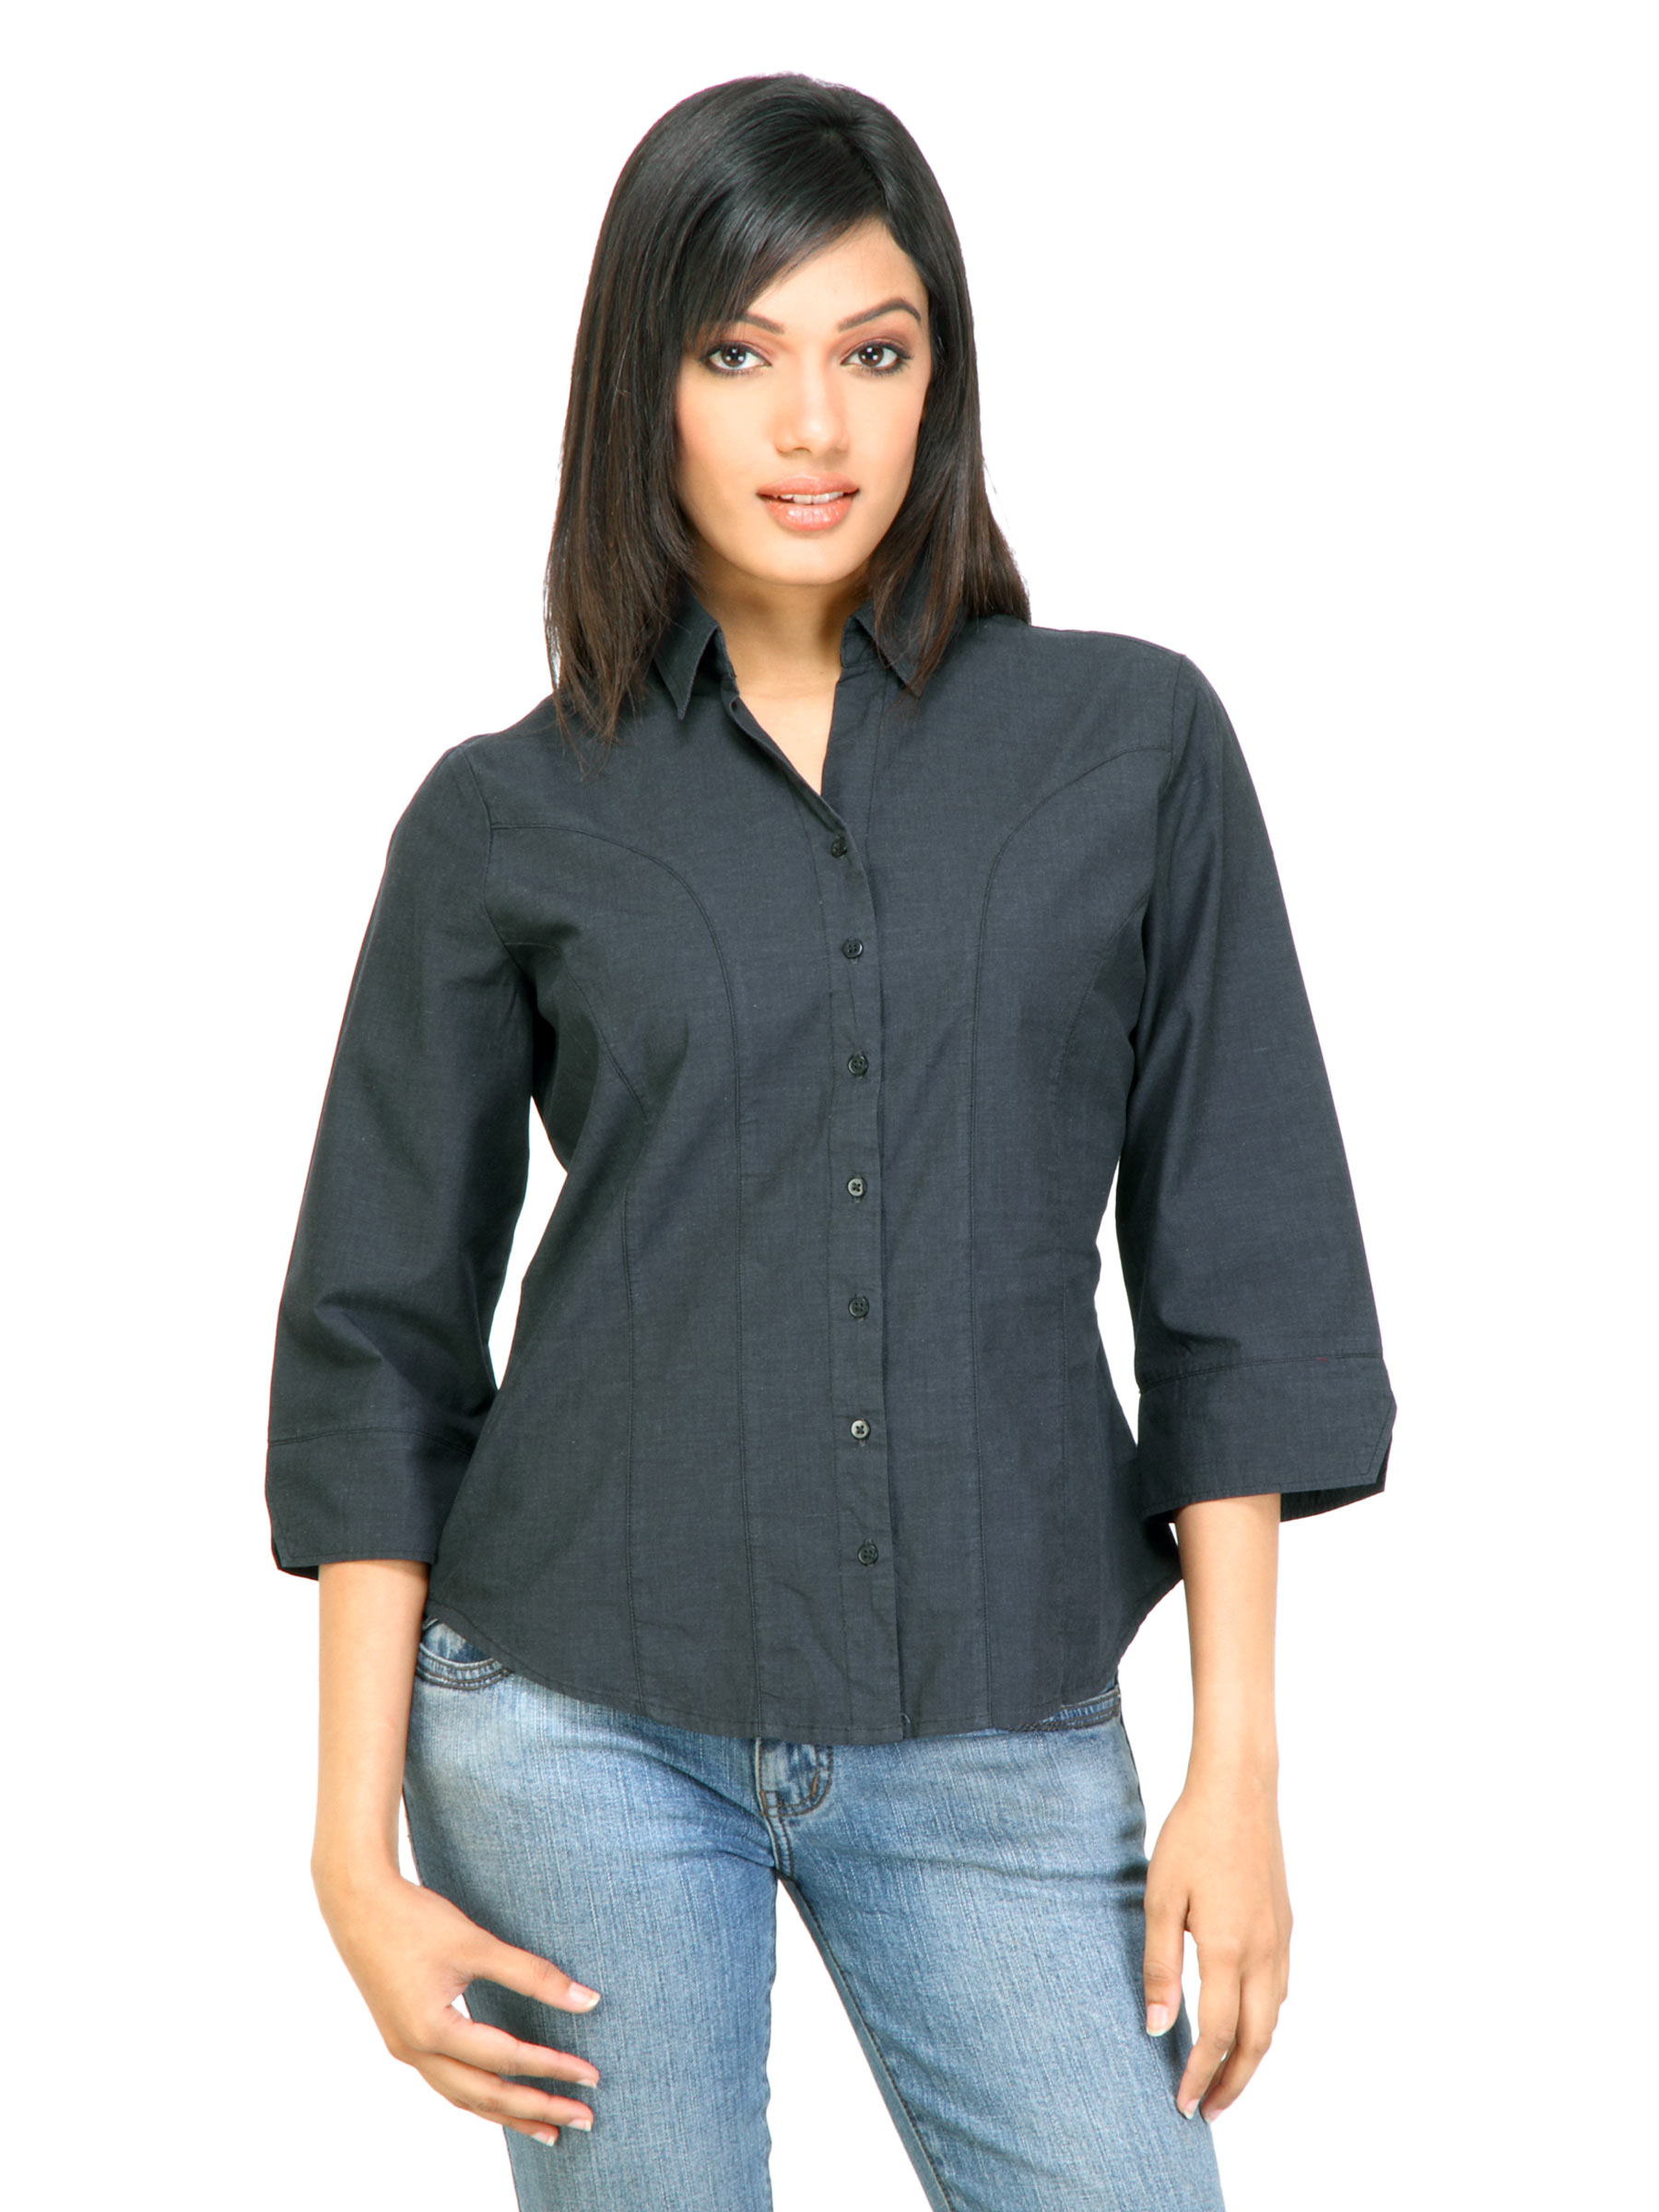 Scullers For Her Women Casual Shirt Black Shirts